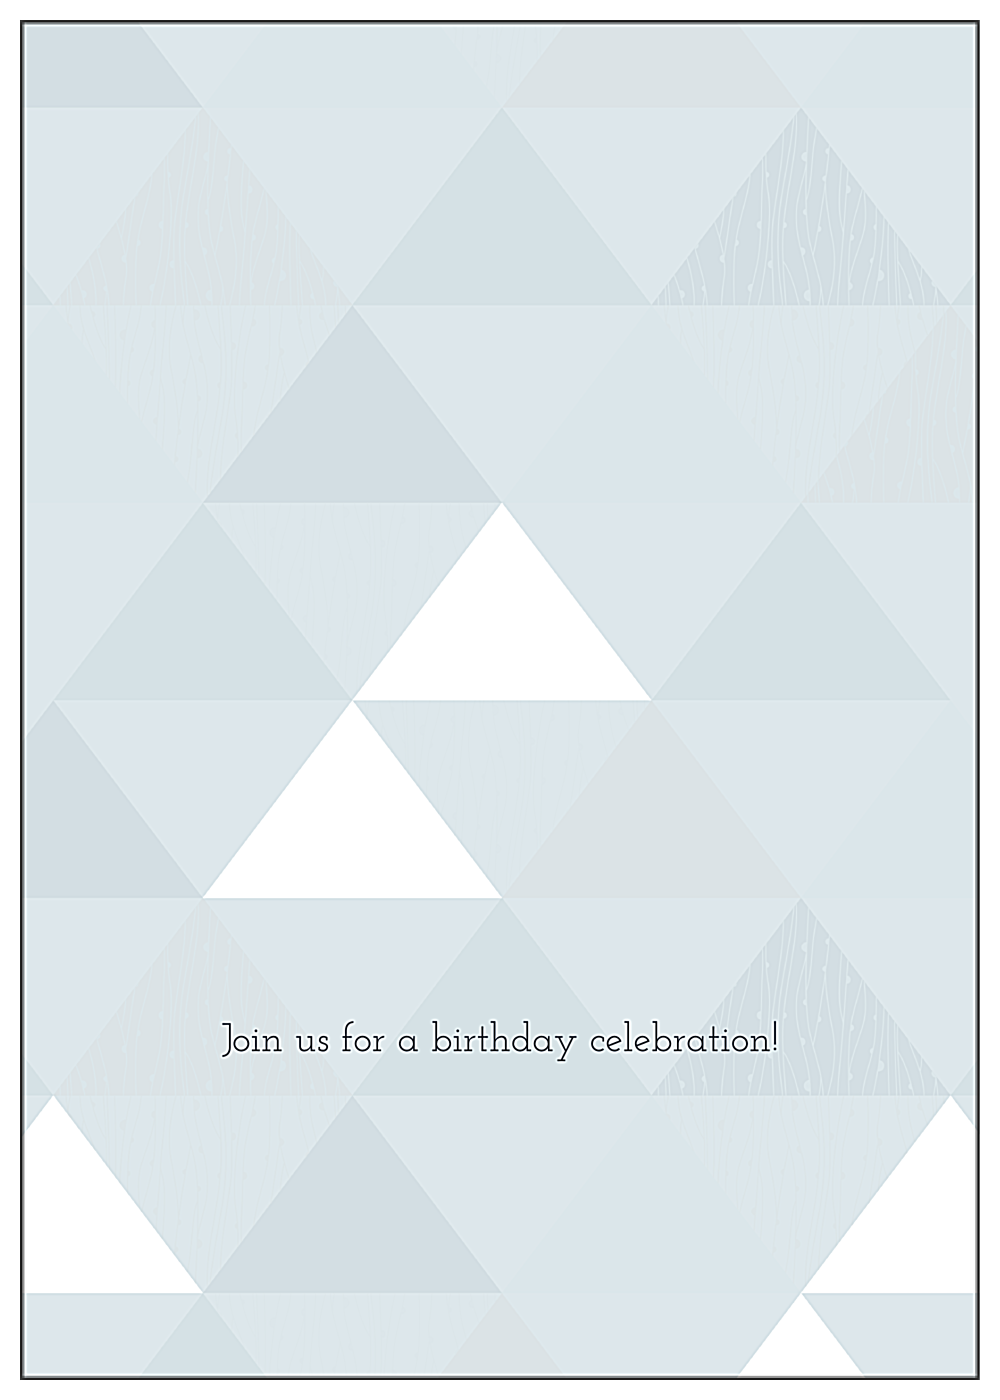 Triangle Party back - Greeting Cards Maker